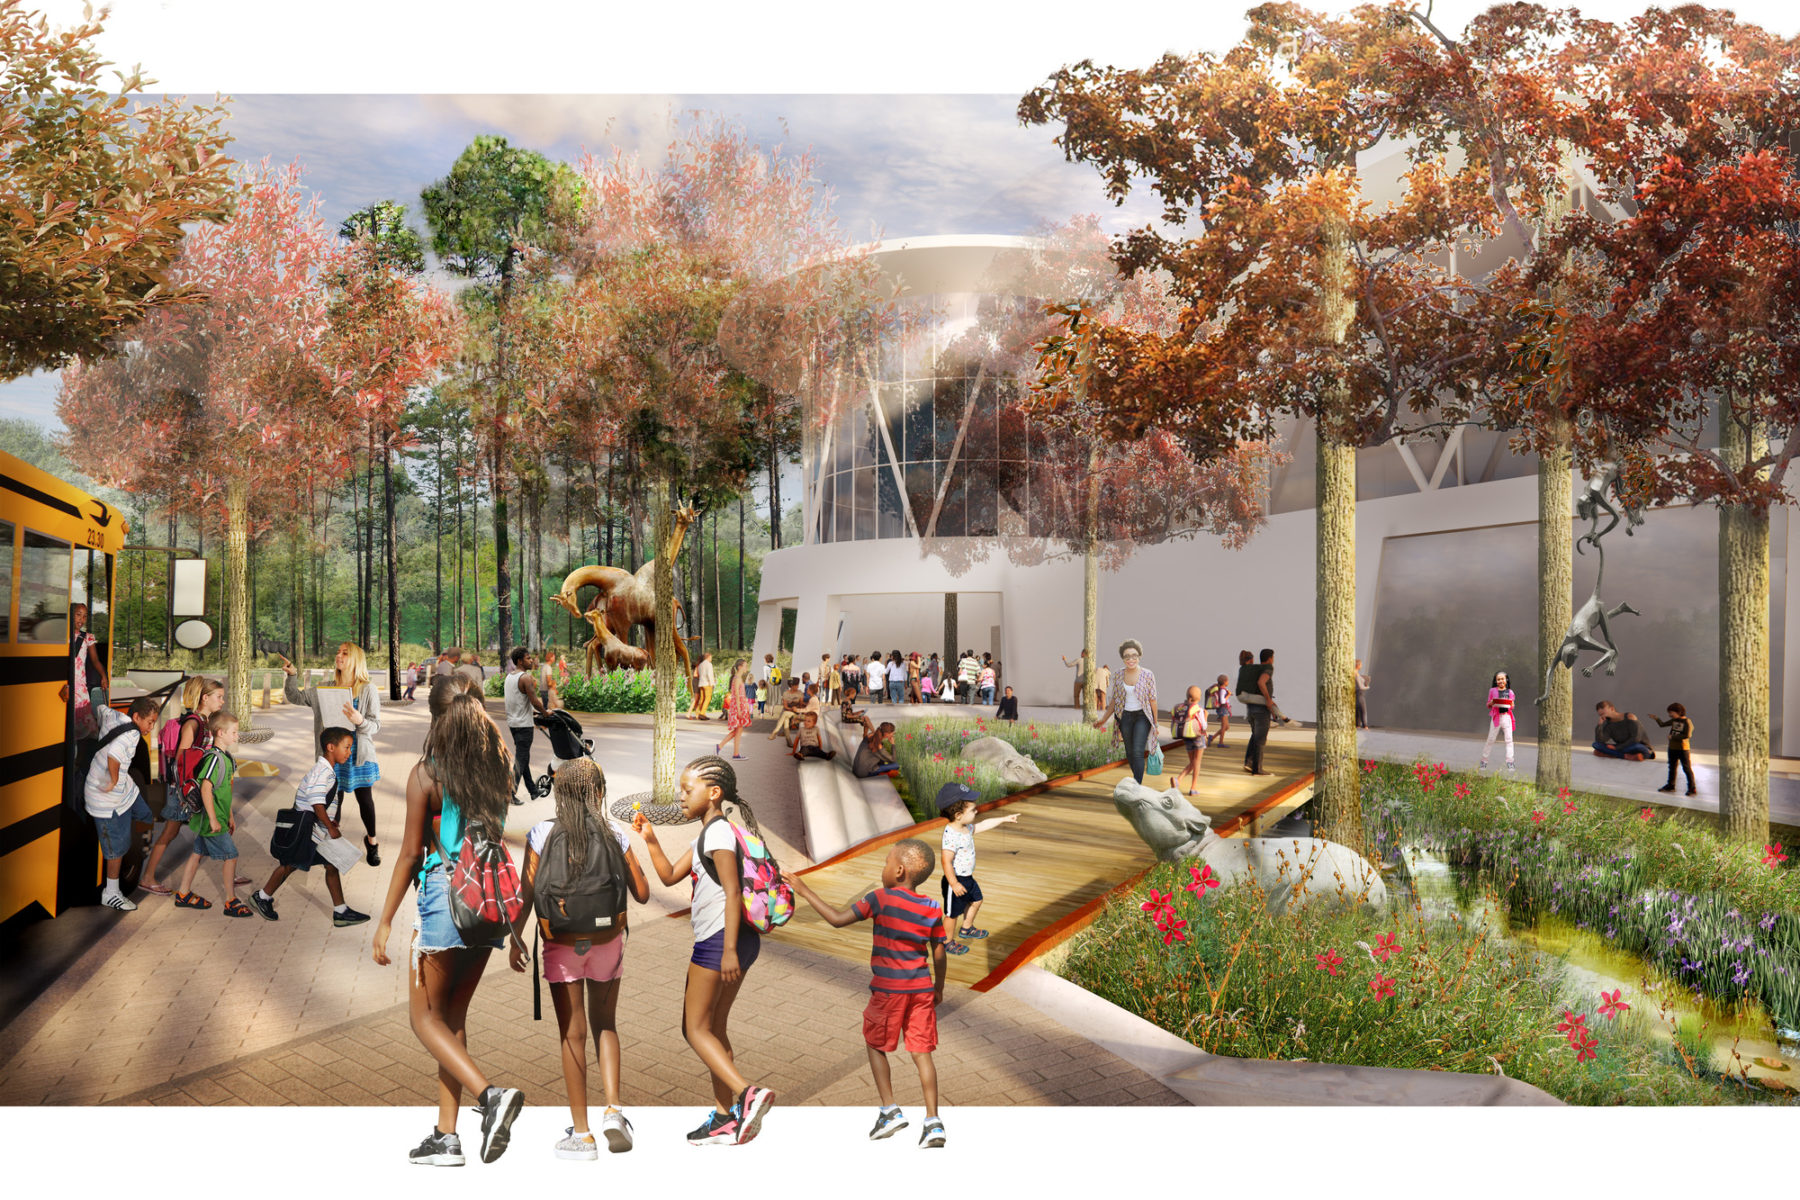 Rendering of the zoo entry plaza. Children spill out of a school bus on the left opposite the entry entry